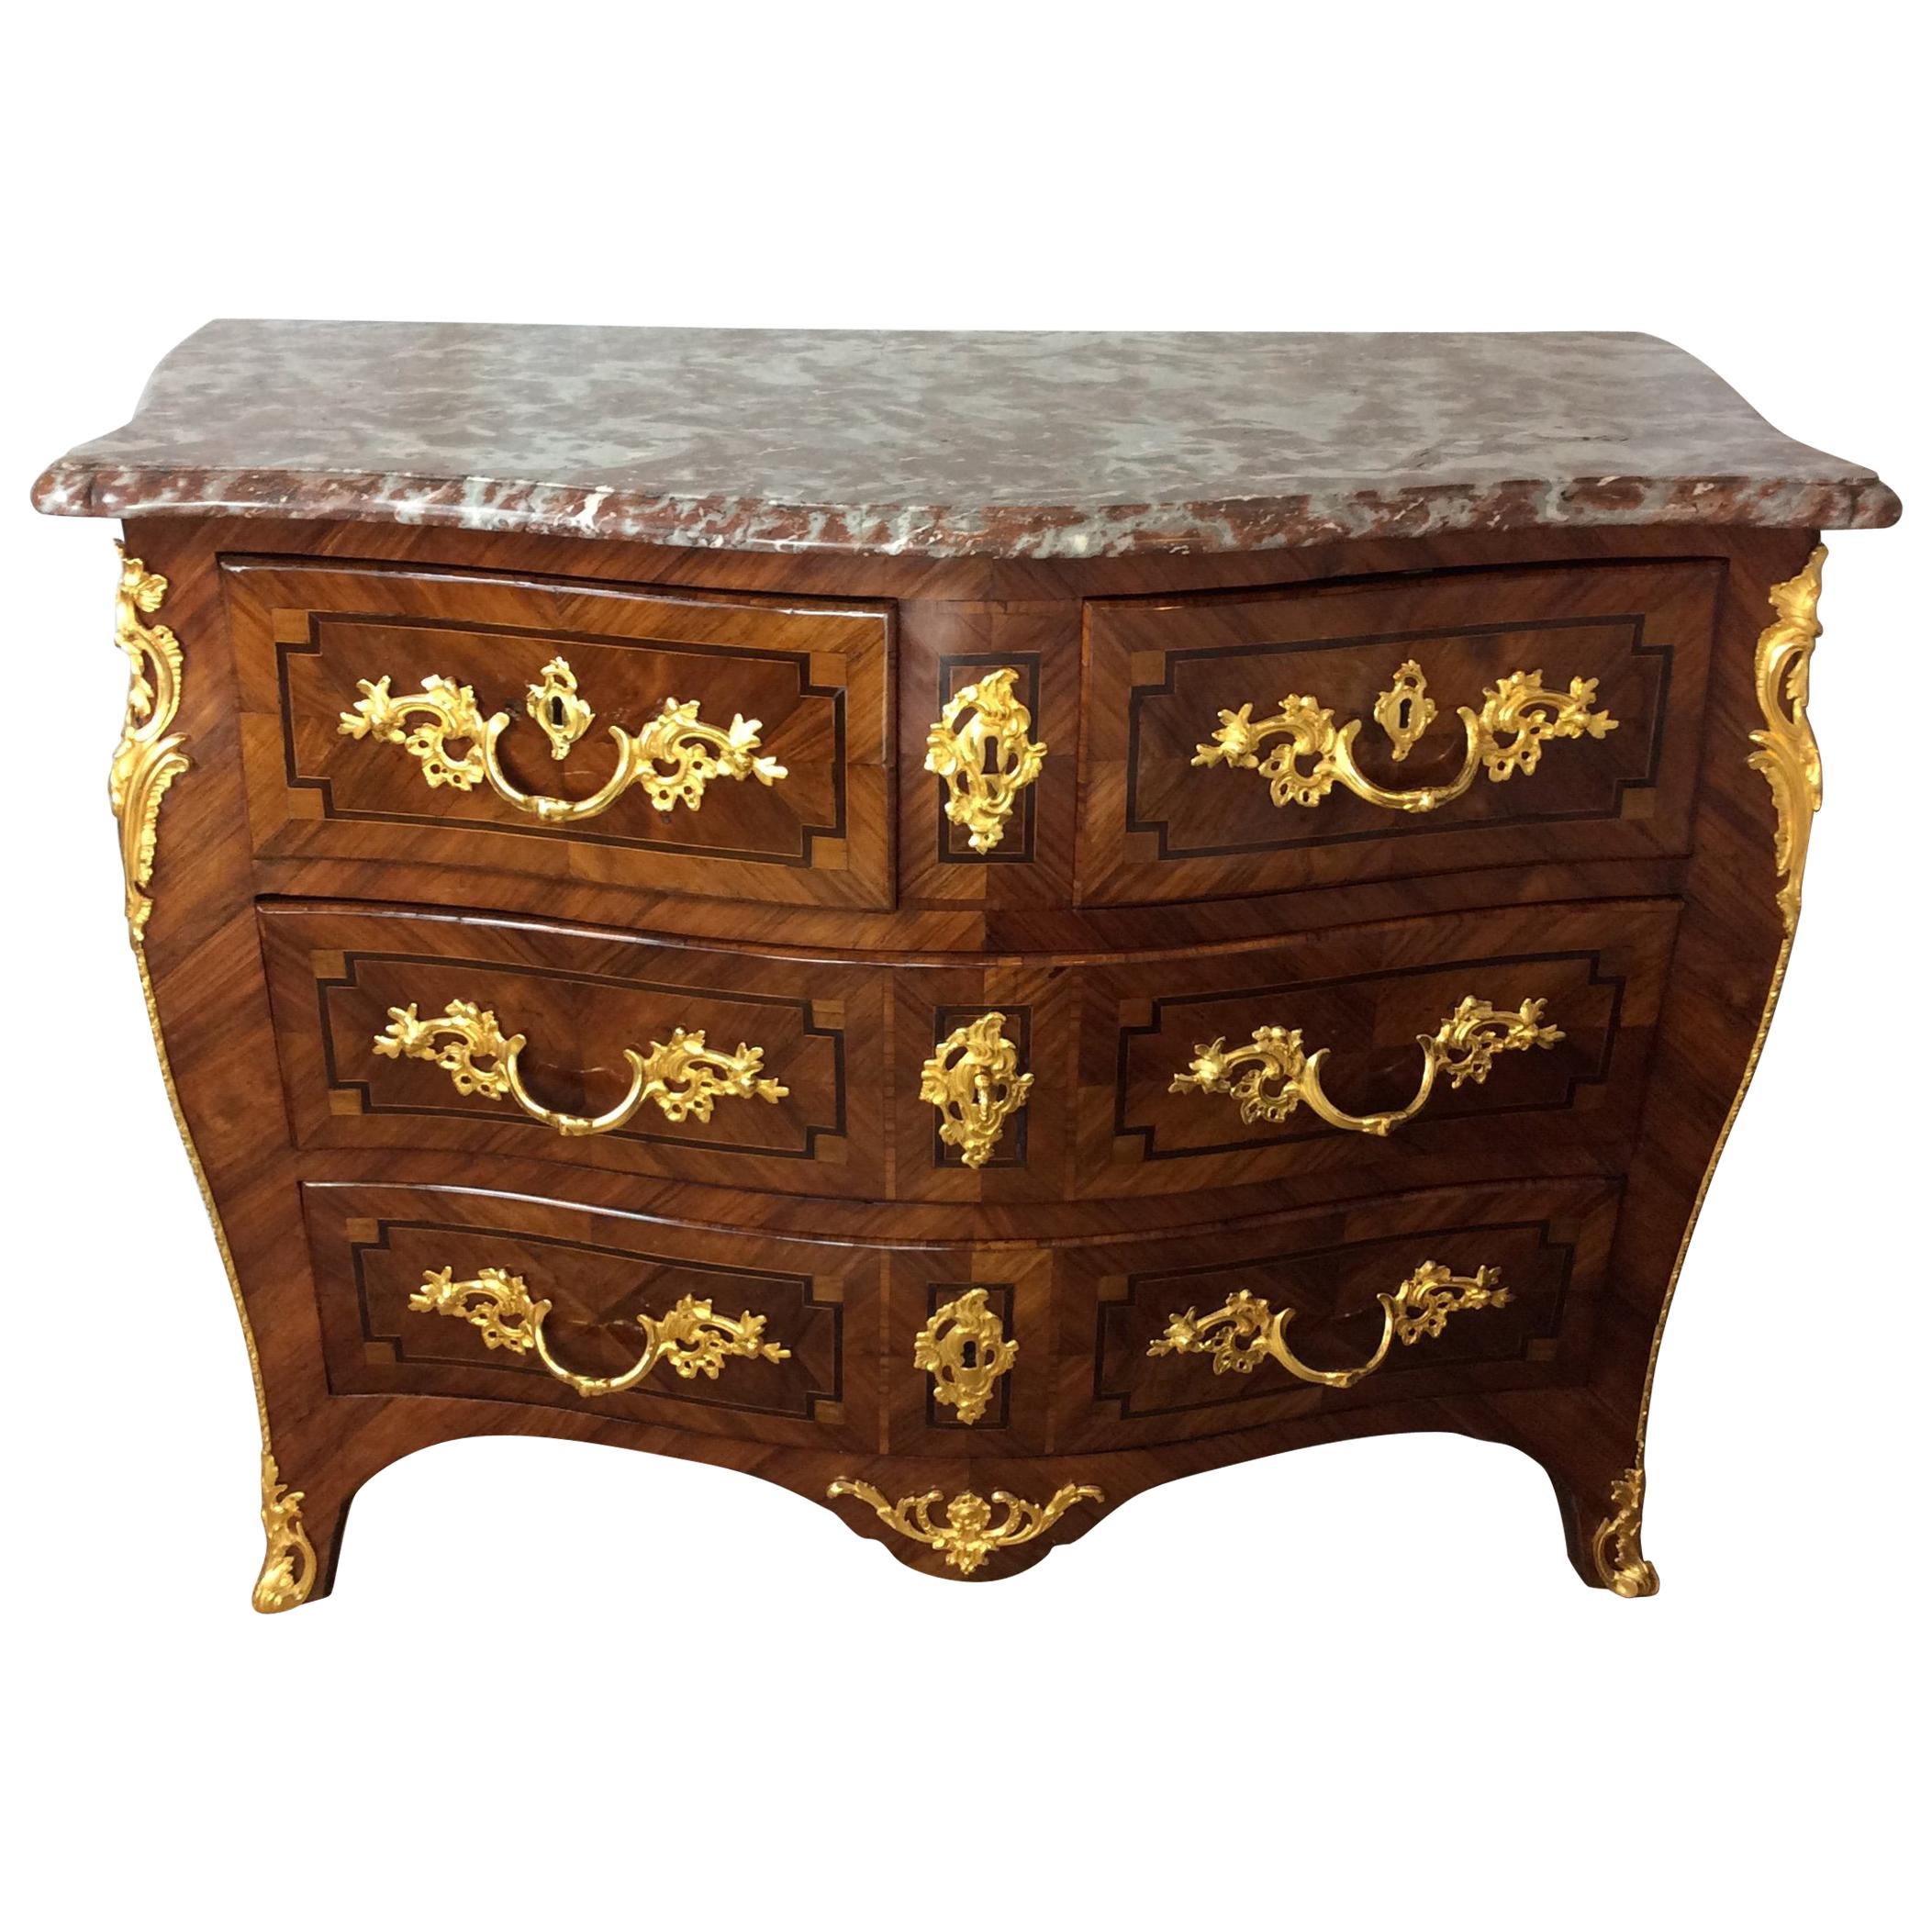 18th Century Louis XV Style Kingwood Commode Chest of Drawers by Pierre Roussel For Sale